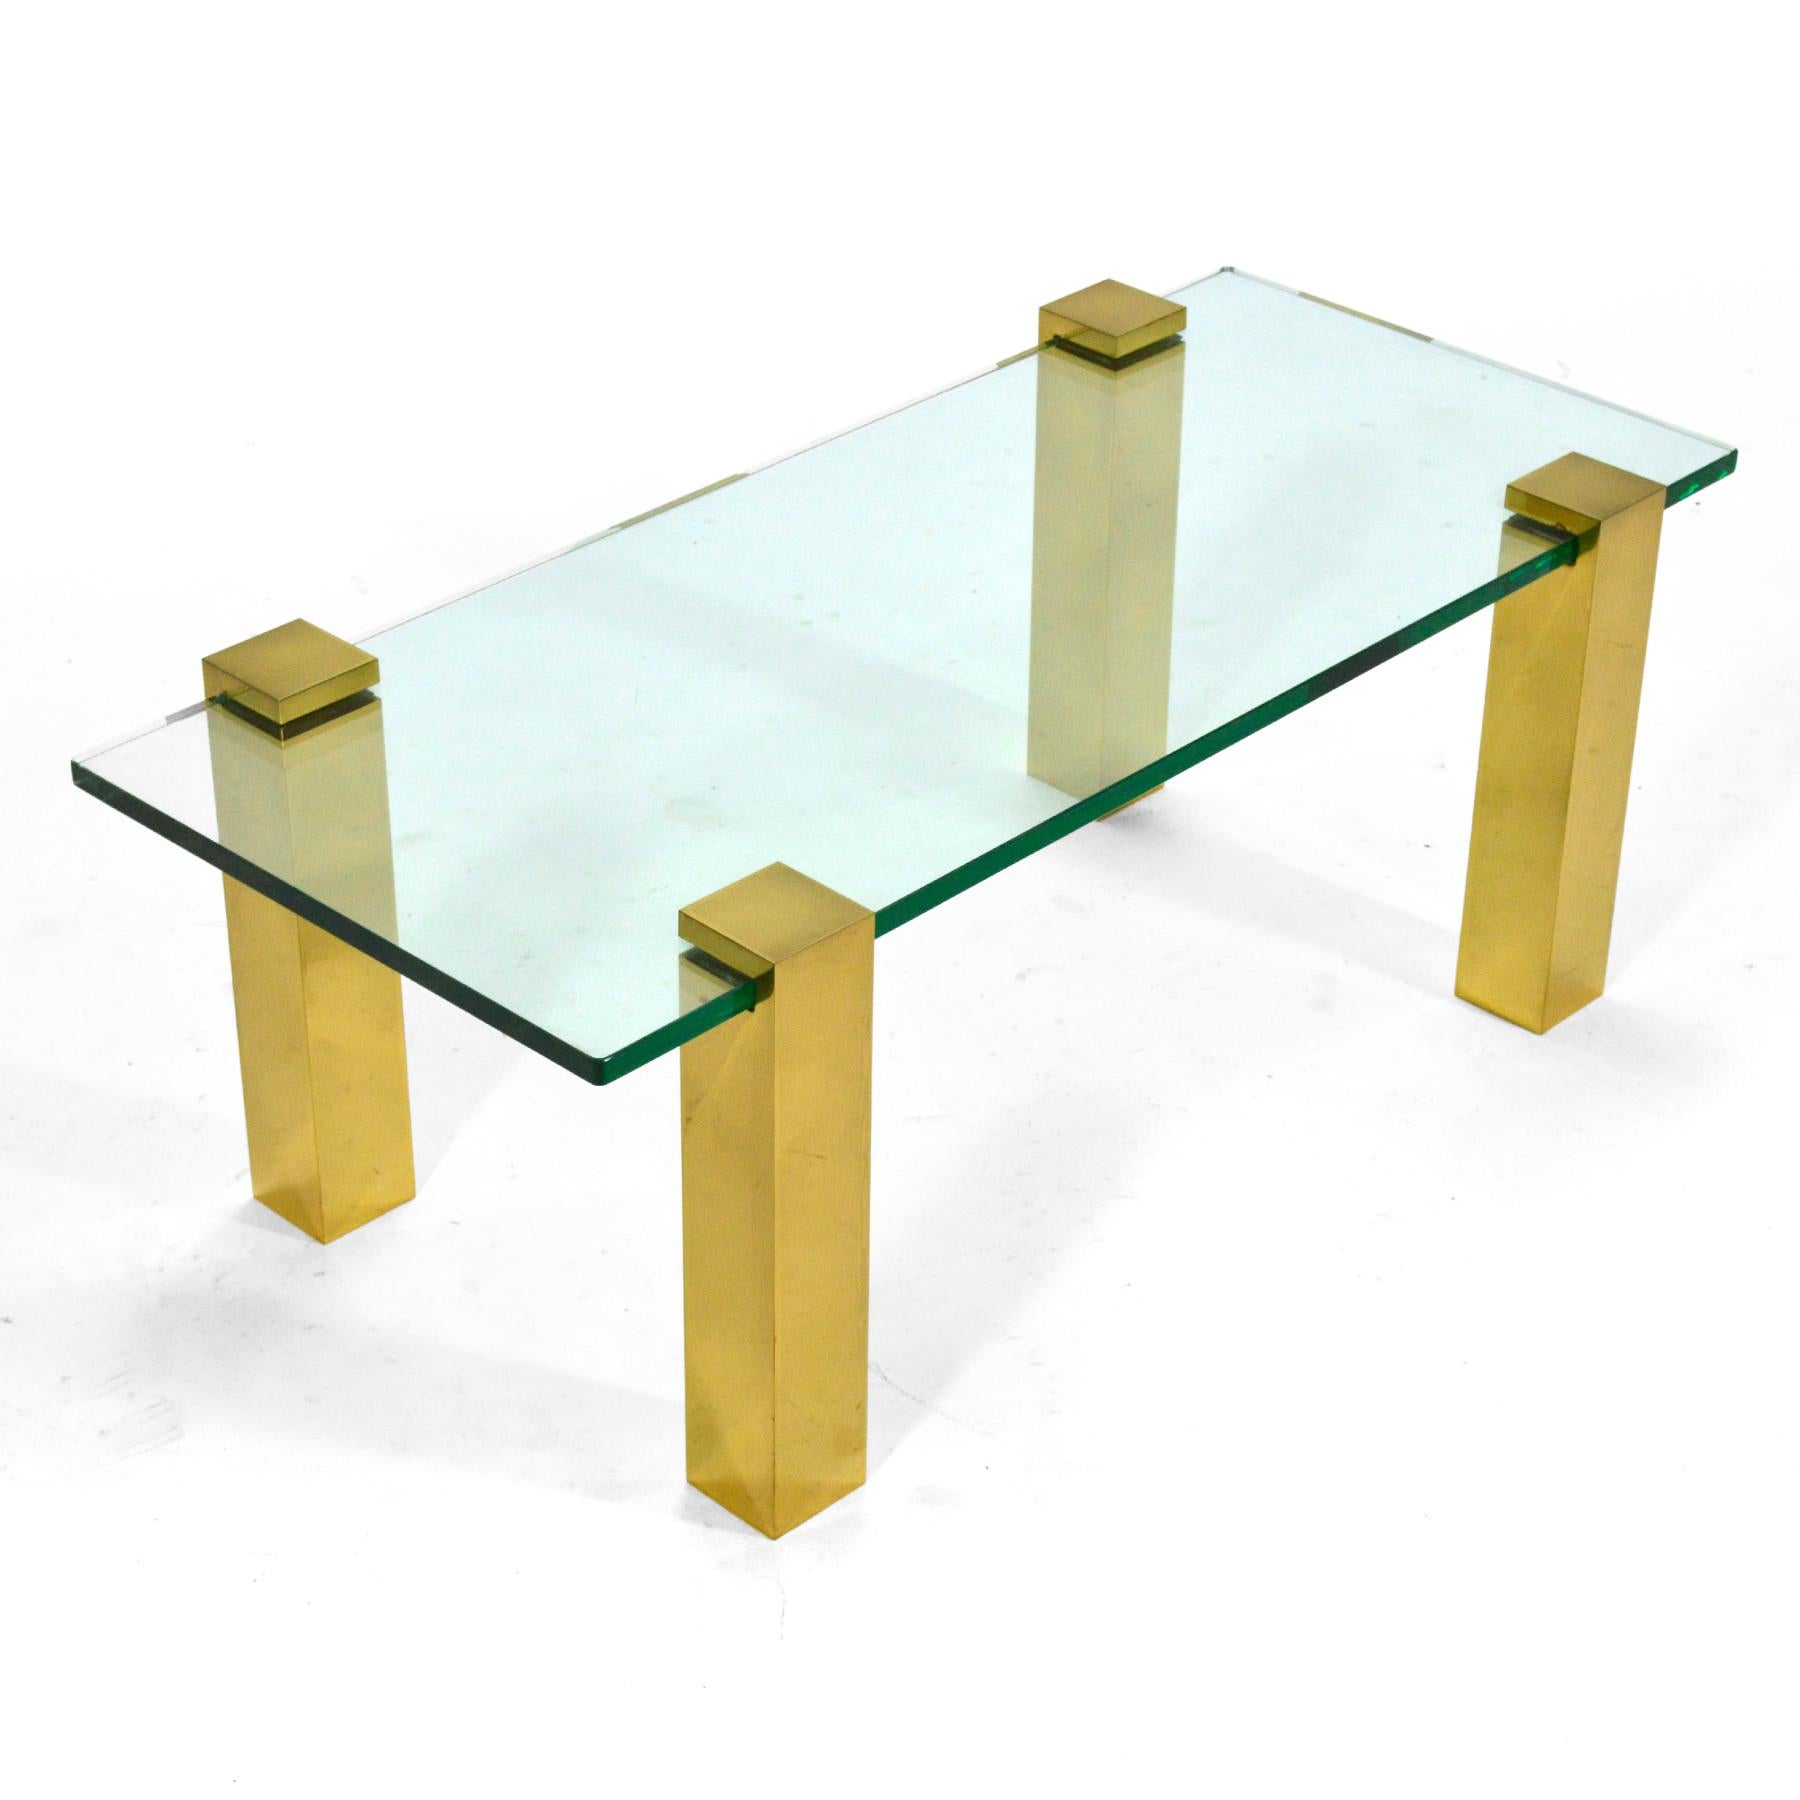 This handsome and versatile minimalist design has four brass legs which attach via pressure to a glass top. They can be configured different ways: in the corners, in the center of each side– and the table can easily change size by replacing the